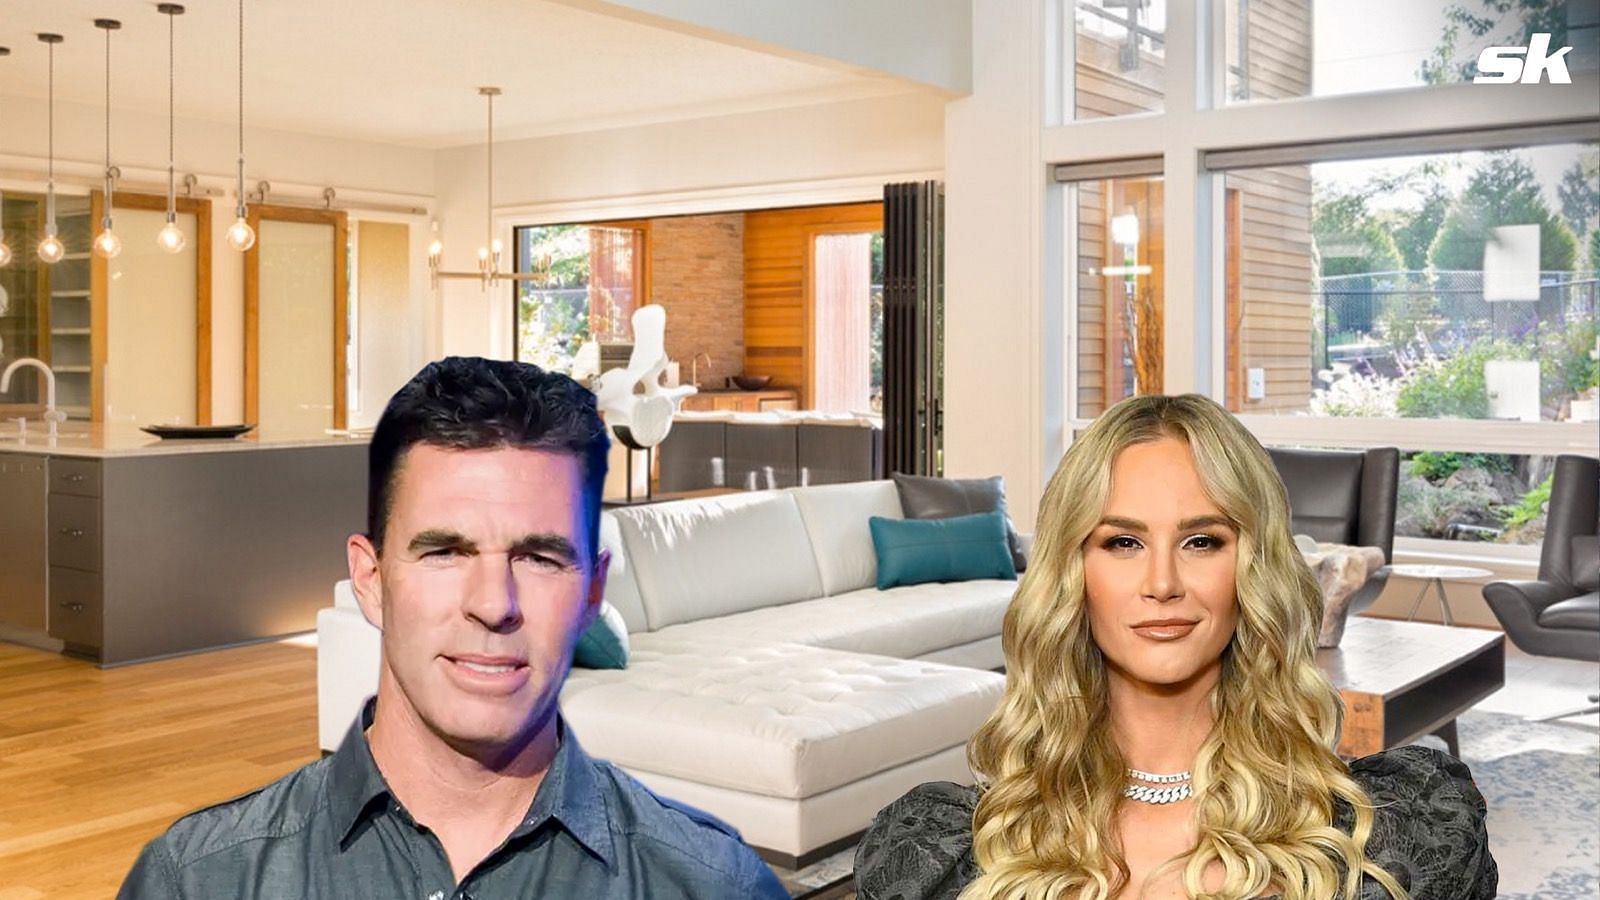 Jim Edmonds Bashes Ex Meghan King For 'Years Of Lies